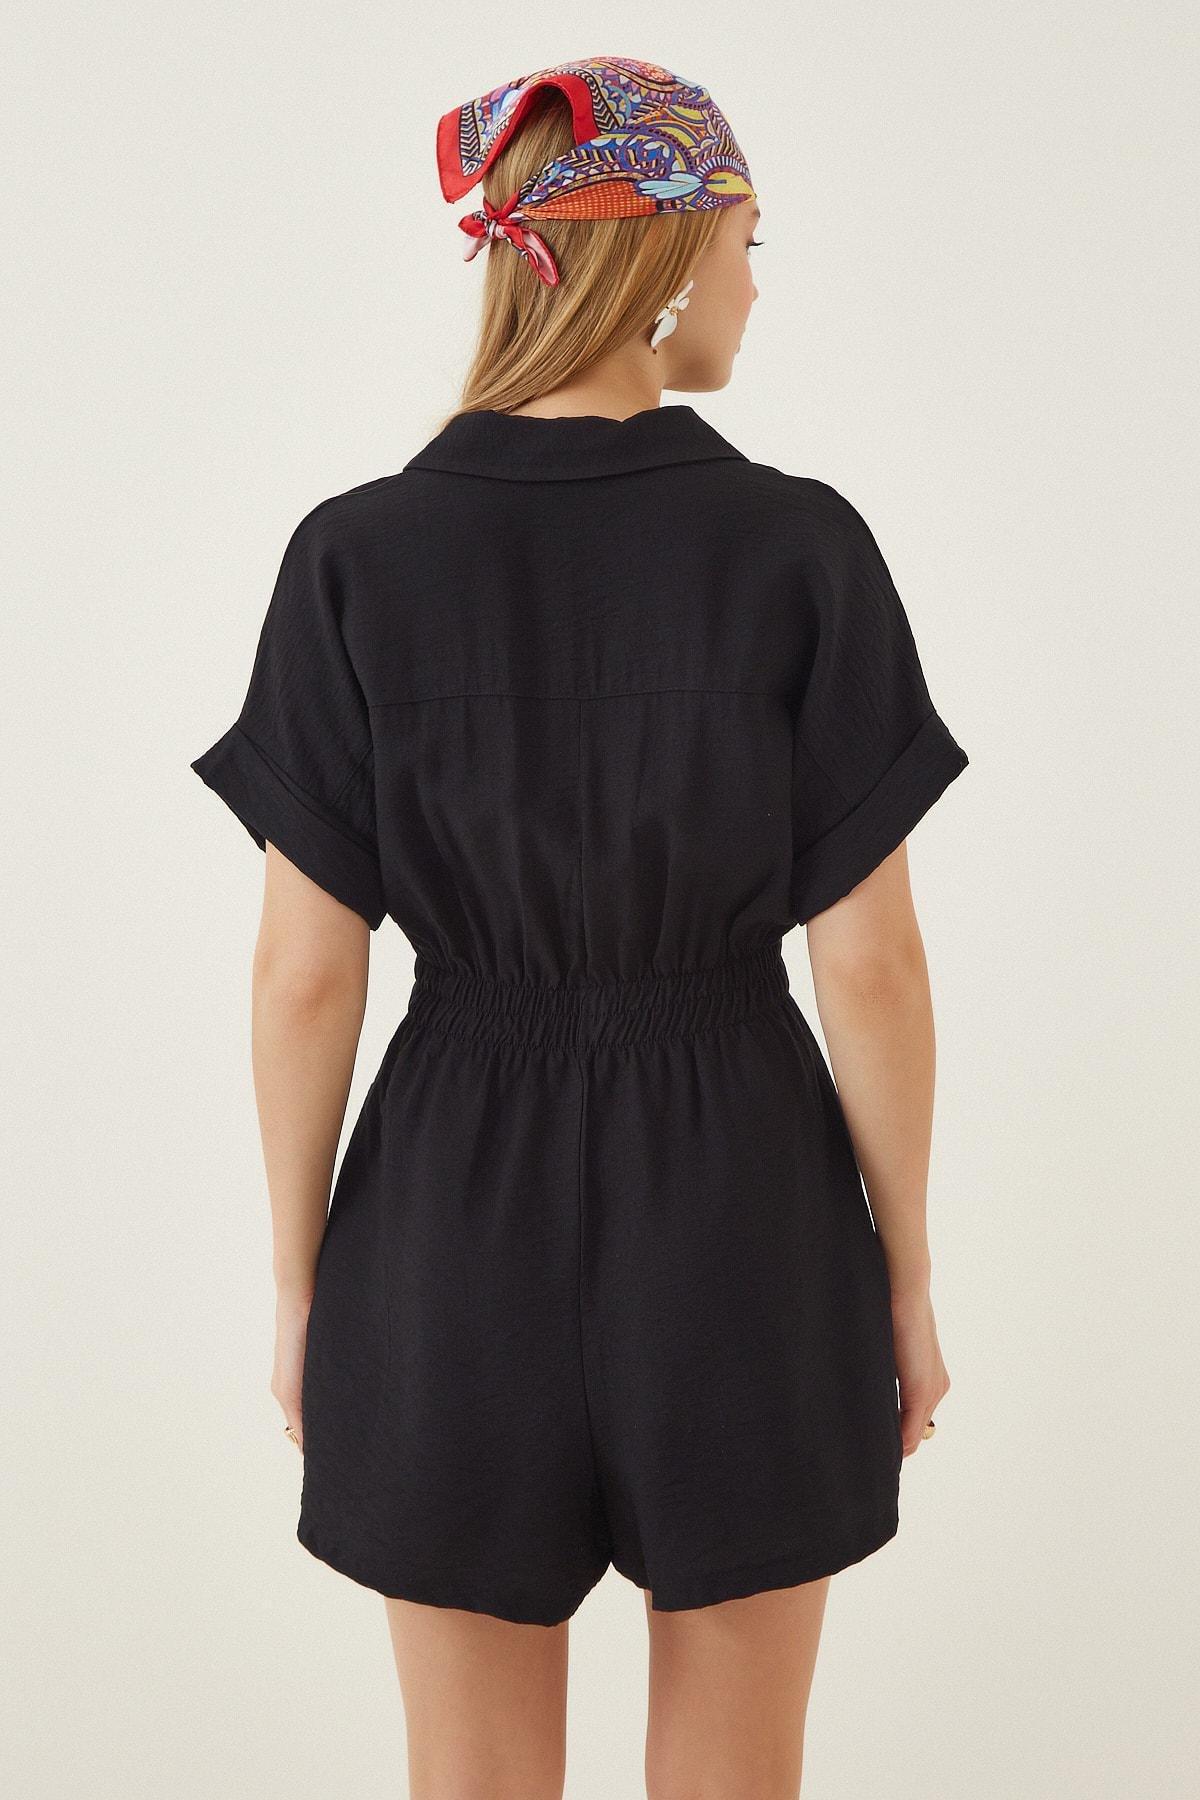 Happiness Istanbul - Black Collared Jumpsuit